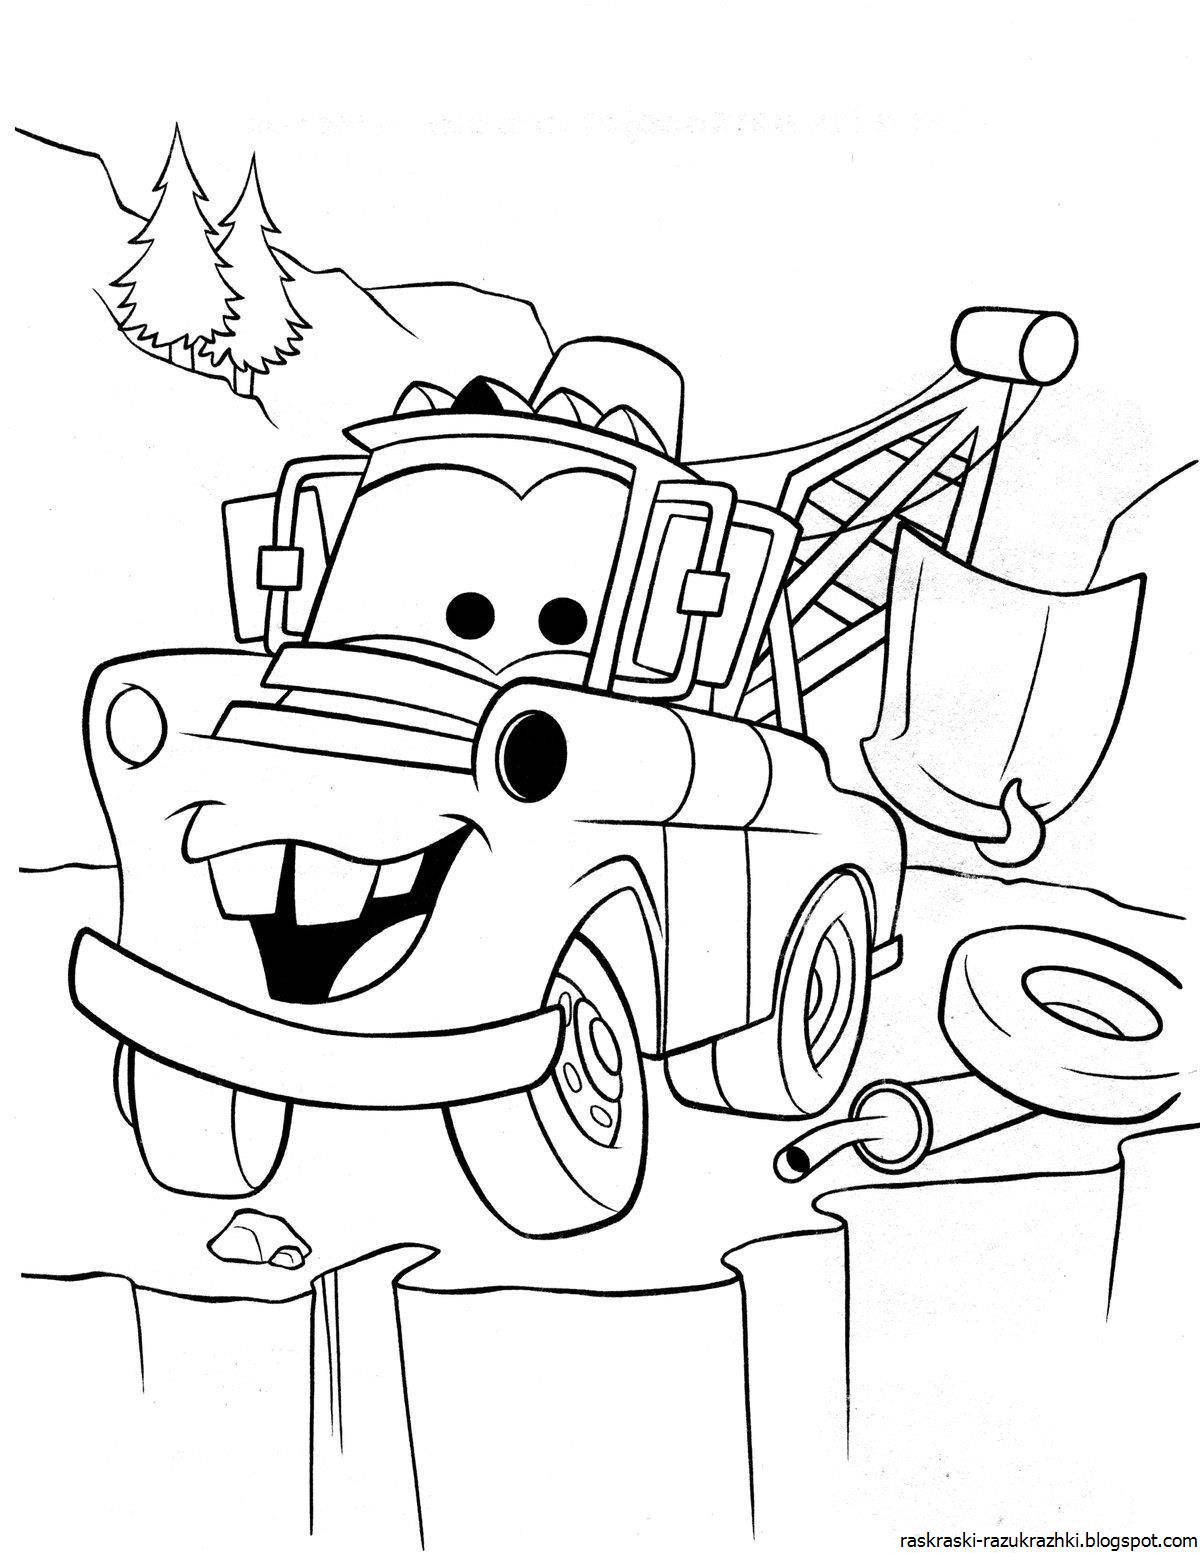 Fun coloring book for boys 5-6 years old